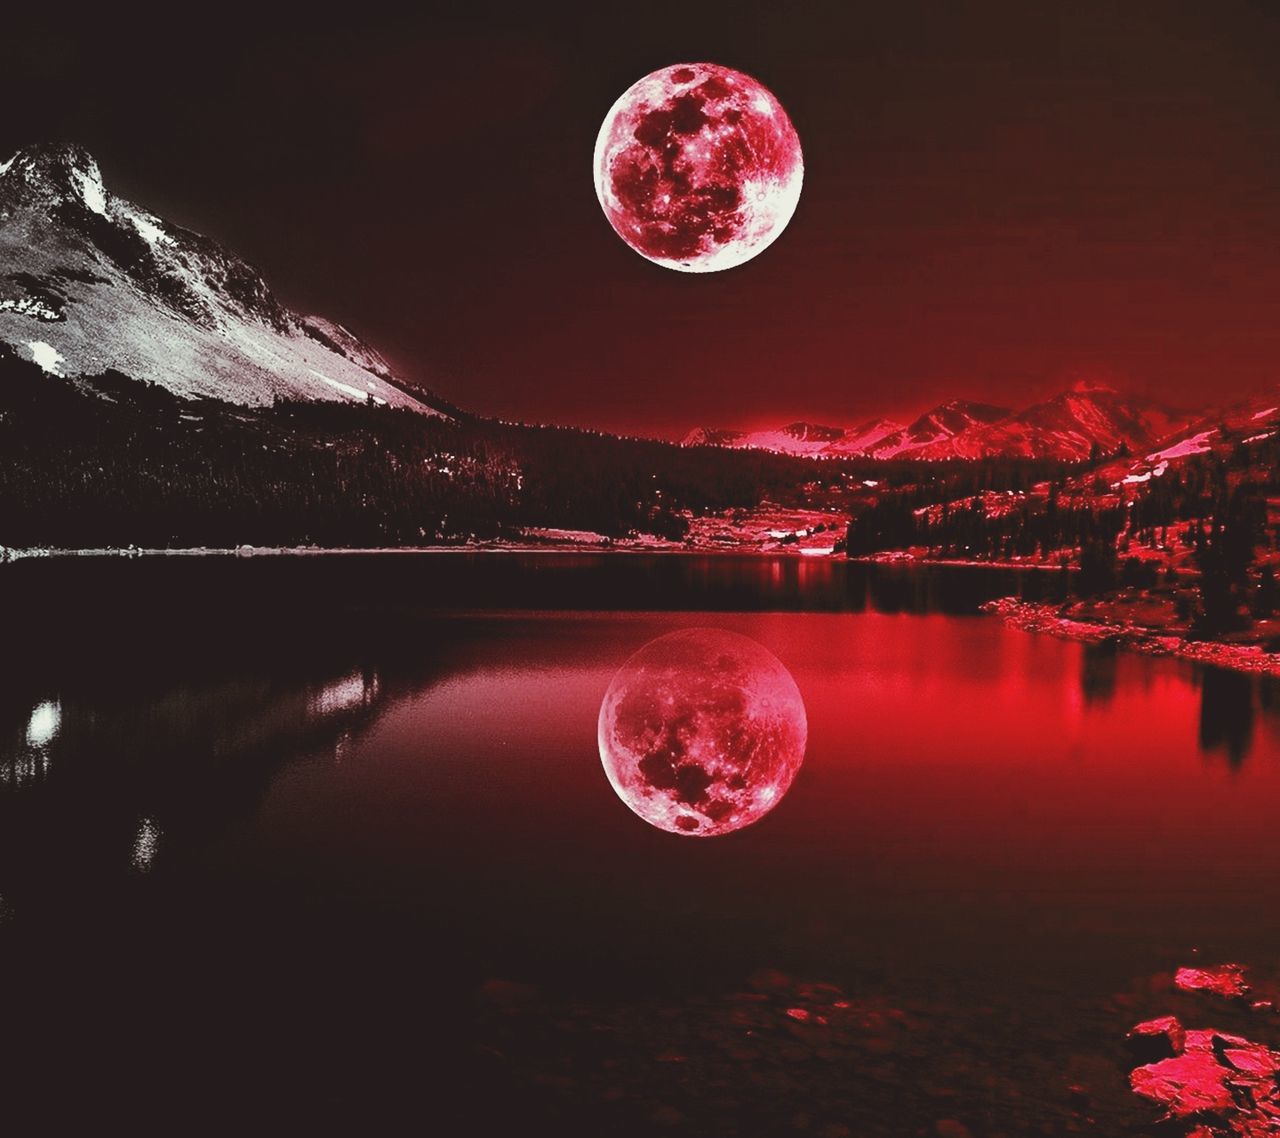 water, lake, beauty in nature, sky, scenics - nature, full moon, moon, reflection, tranquil scene, tranquility, mountain, night, nature, no people, waterfront, space, red, astronomy, idyllic, outdoors, planetary moon, moonlight